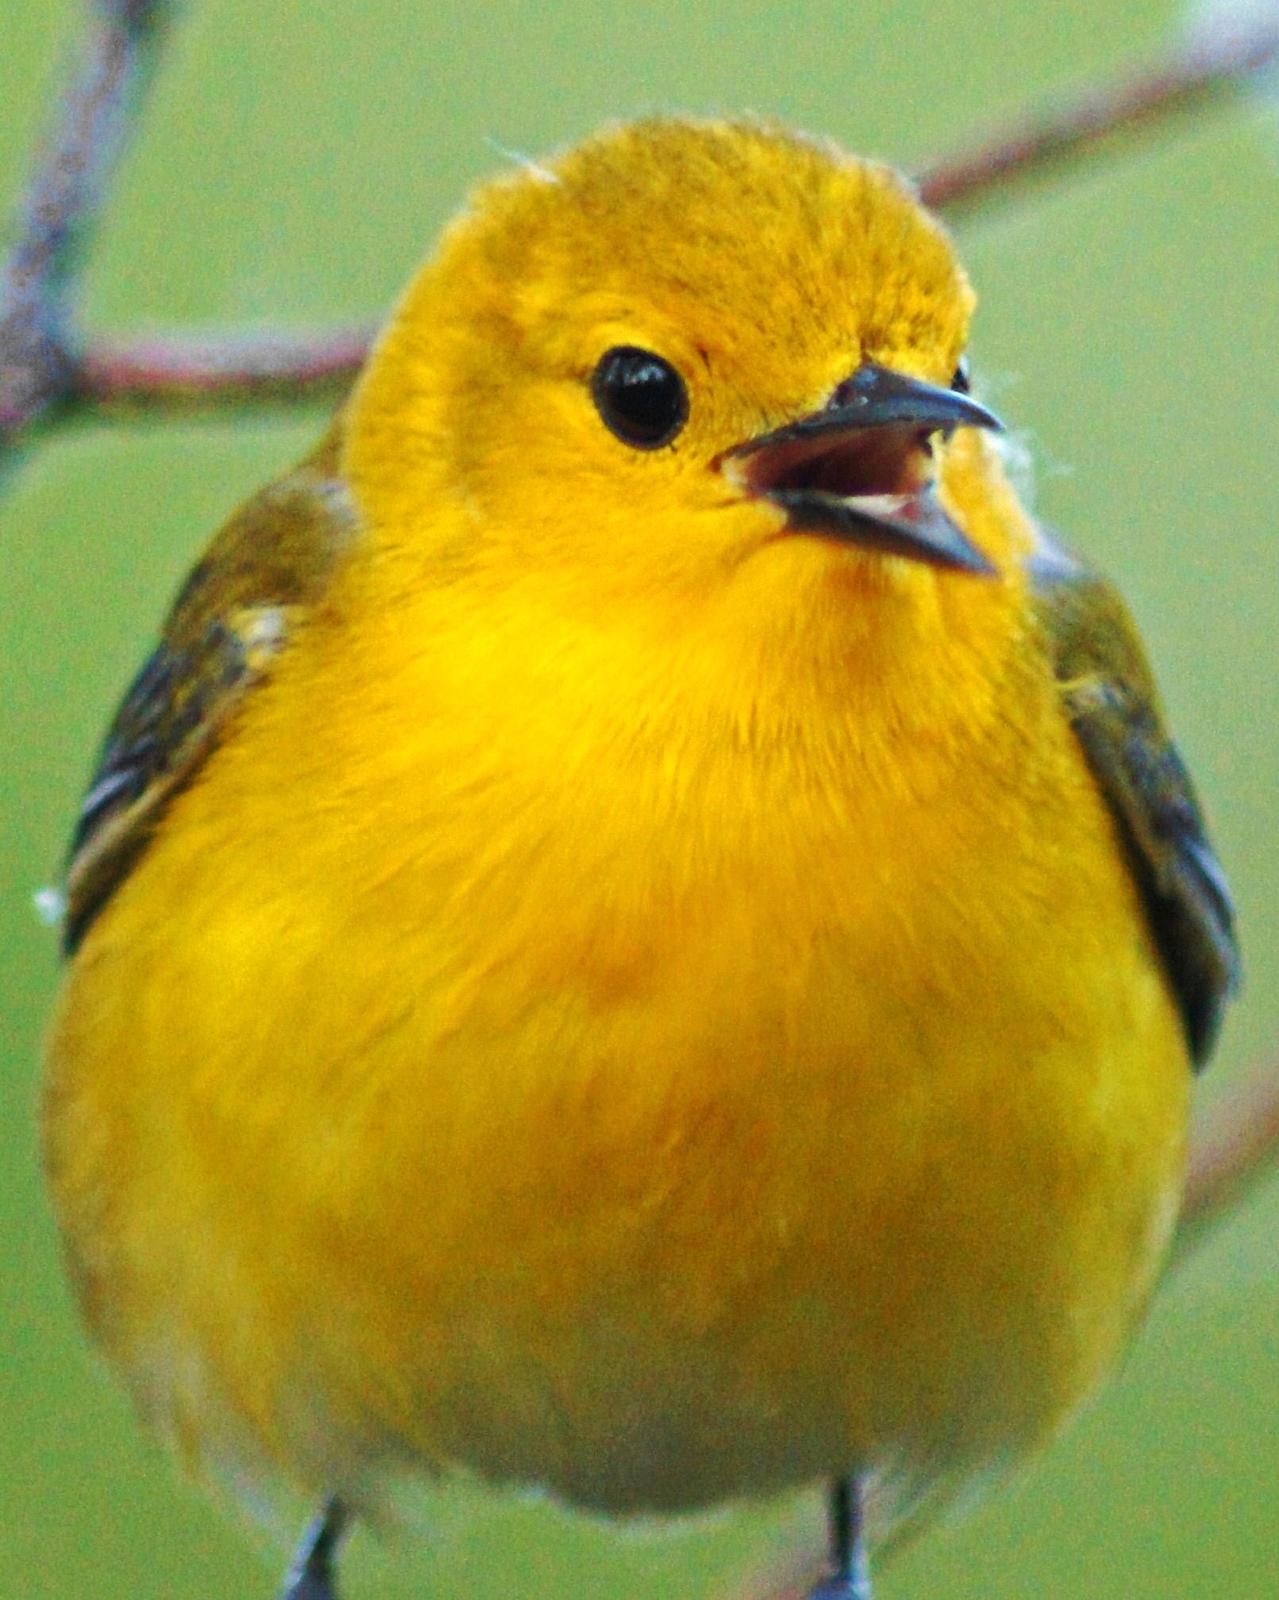 Prothonotary Warbler Photo by Nathan DeBruine